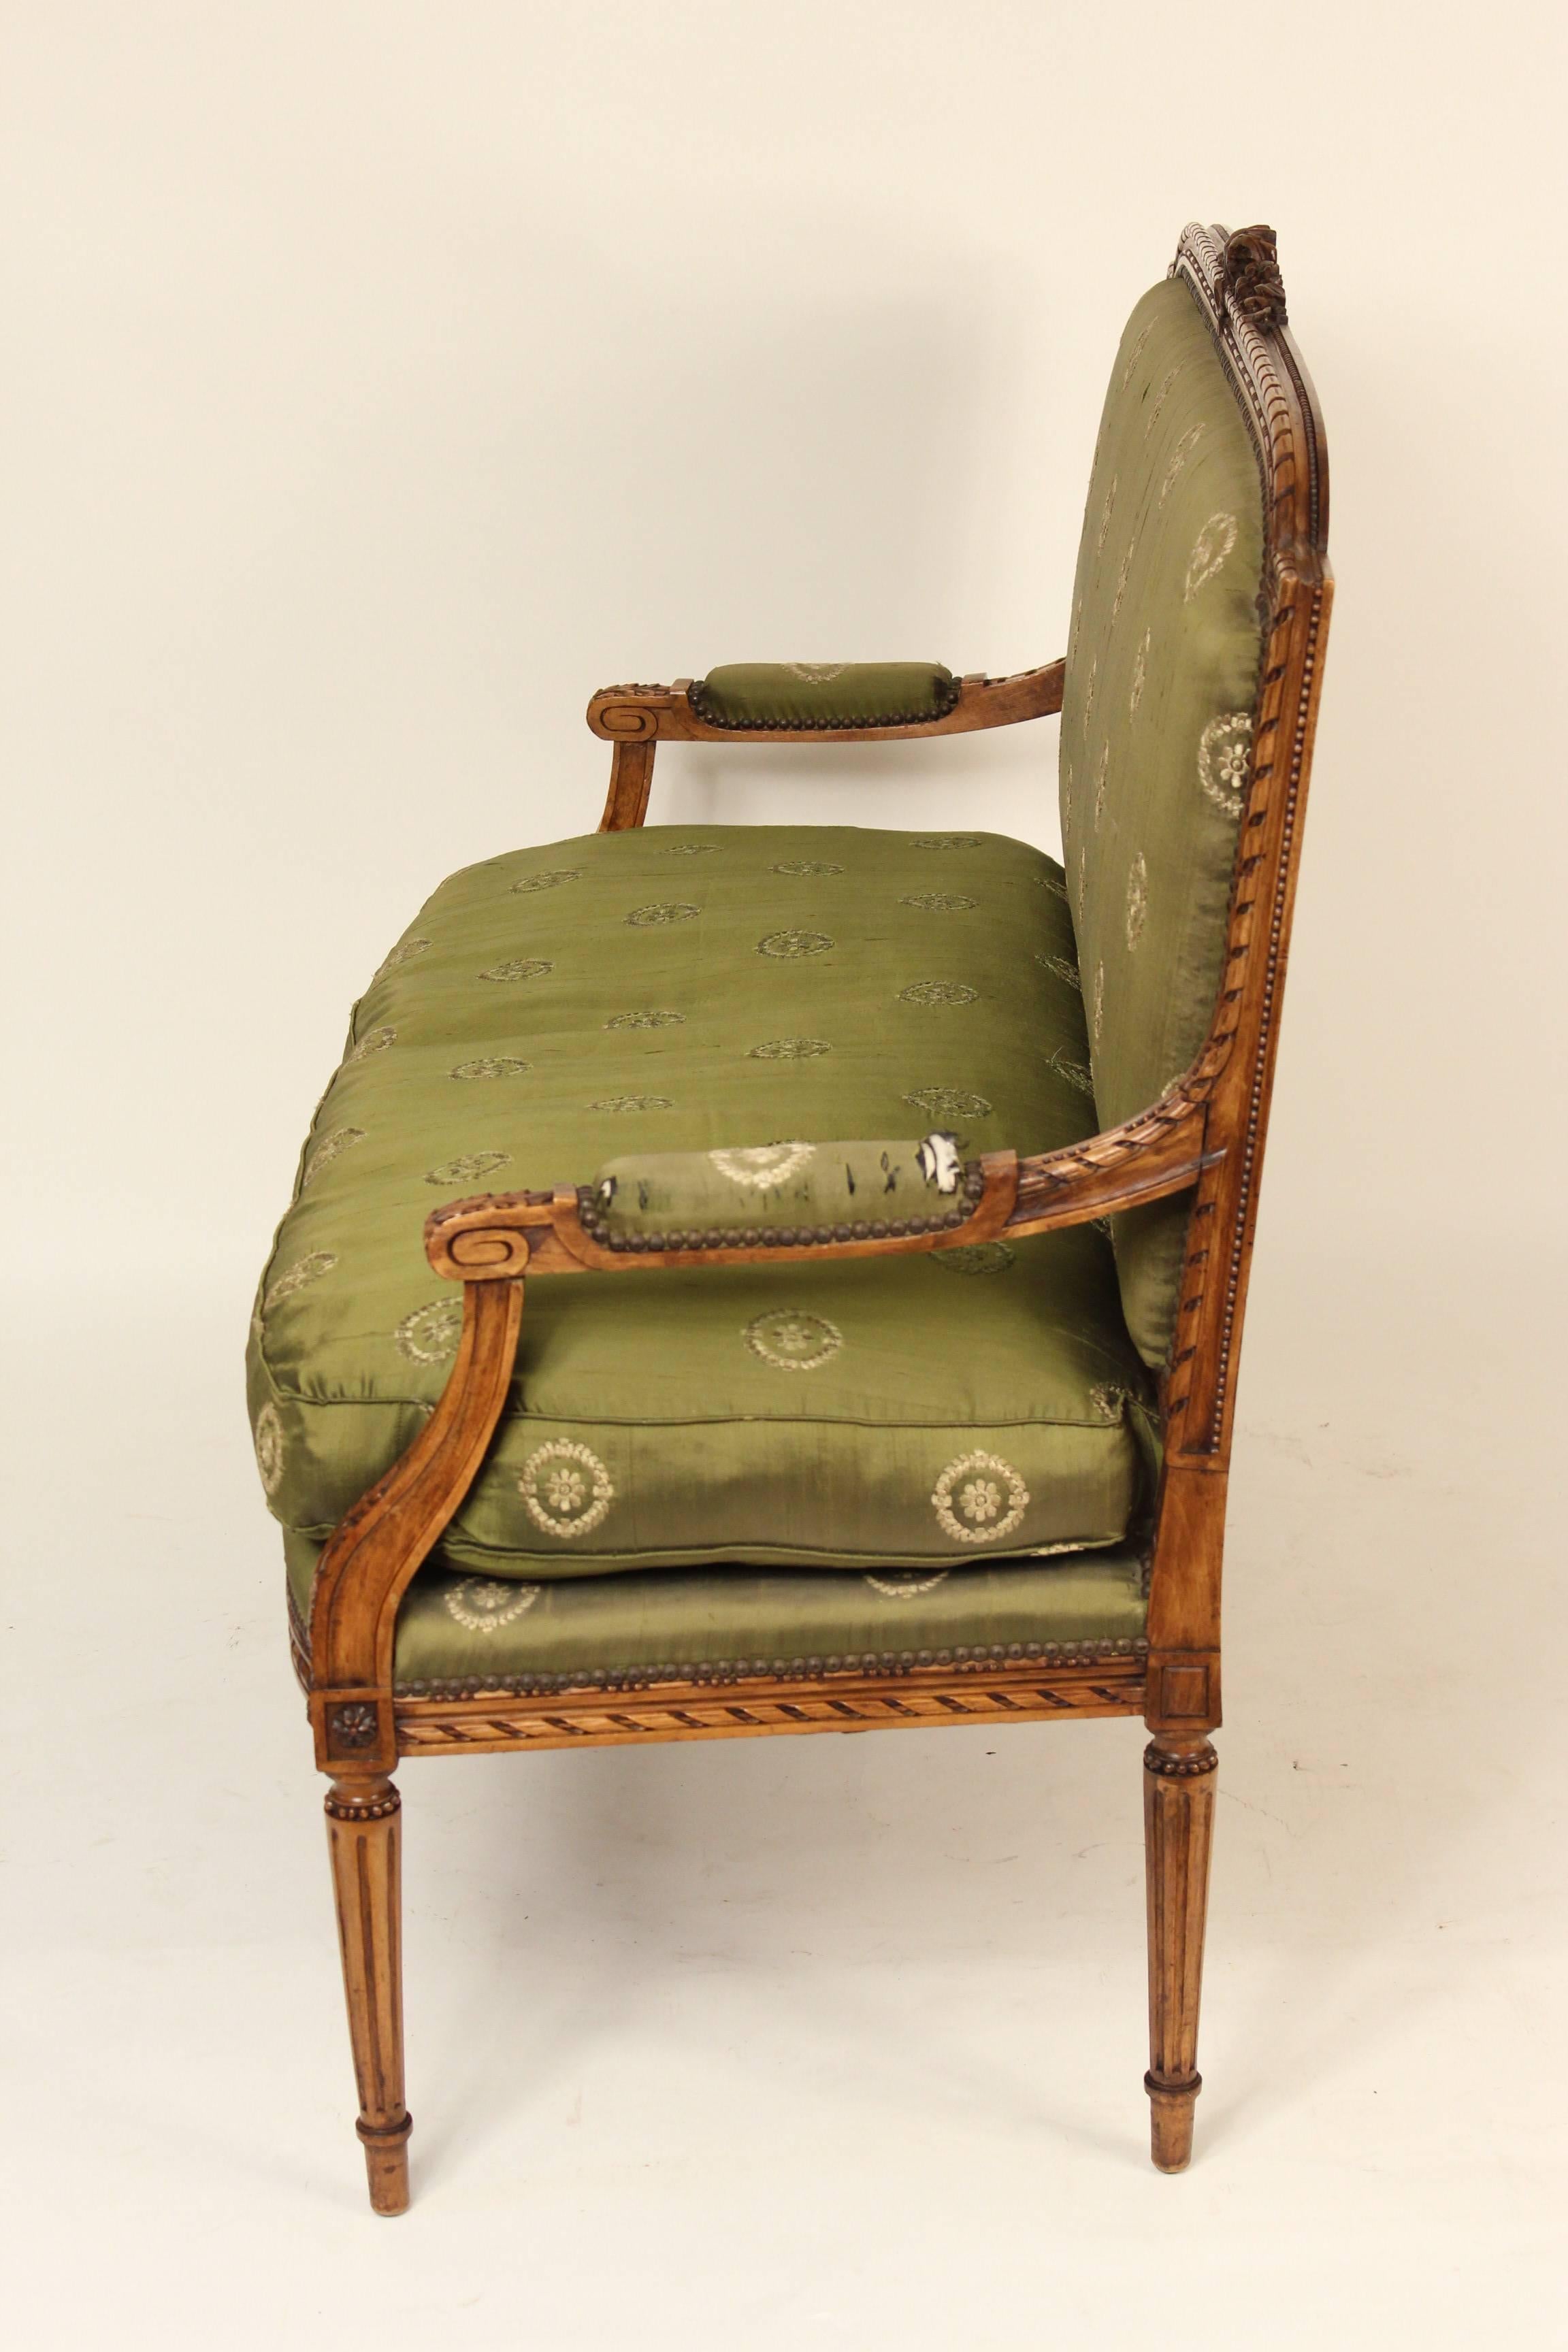 Louis XVI style carved beechwood settee, circa 1920. This settee has very nice hand-carved details.